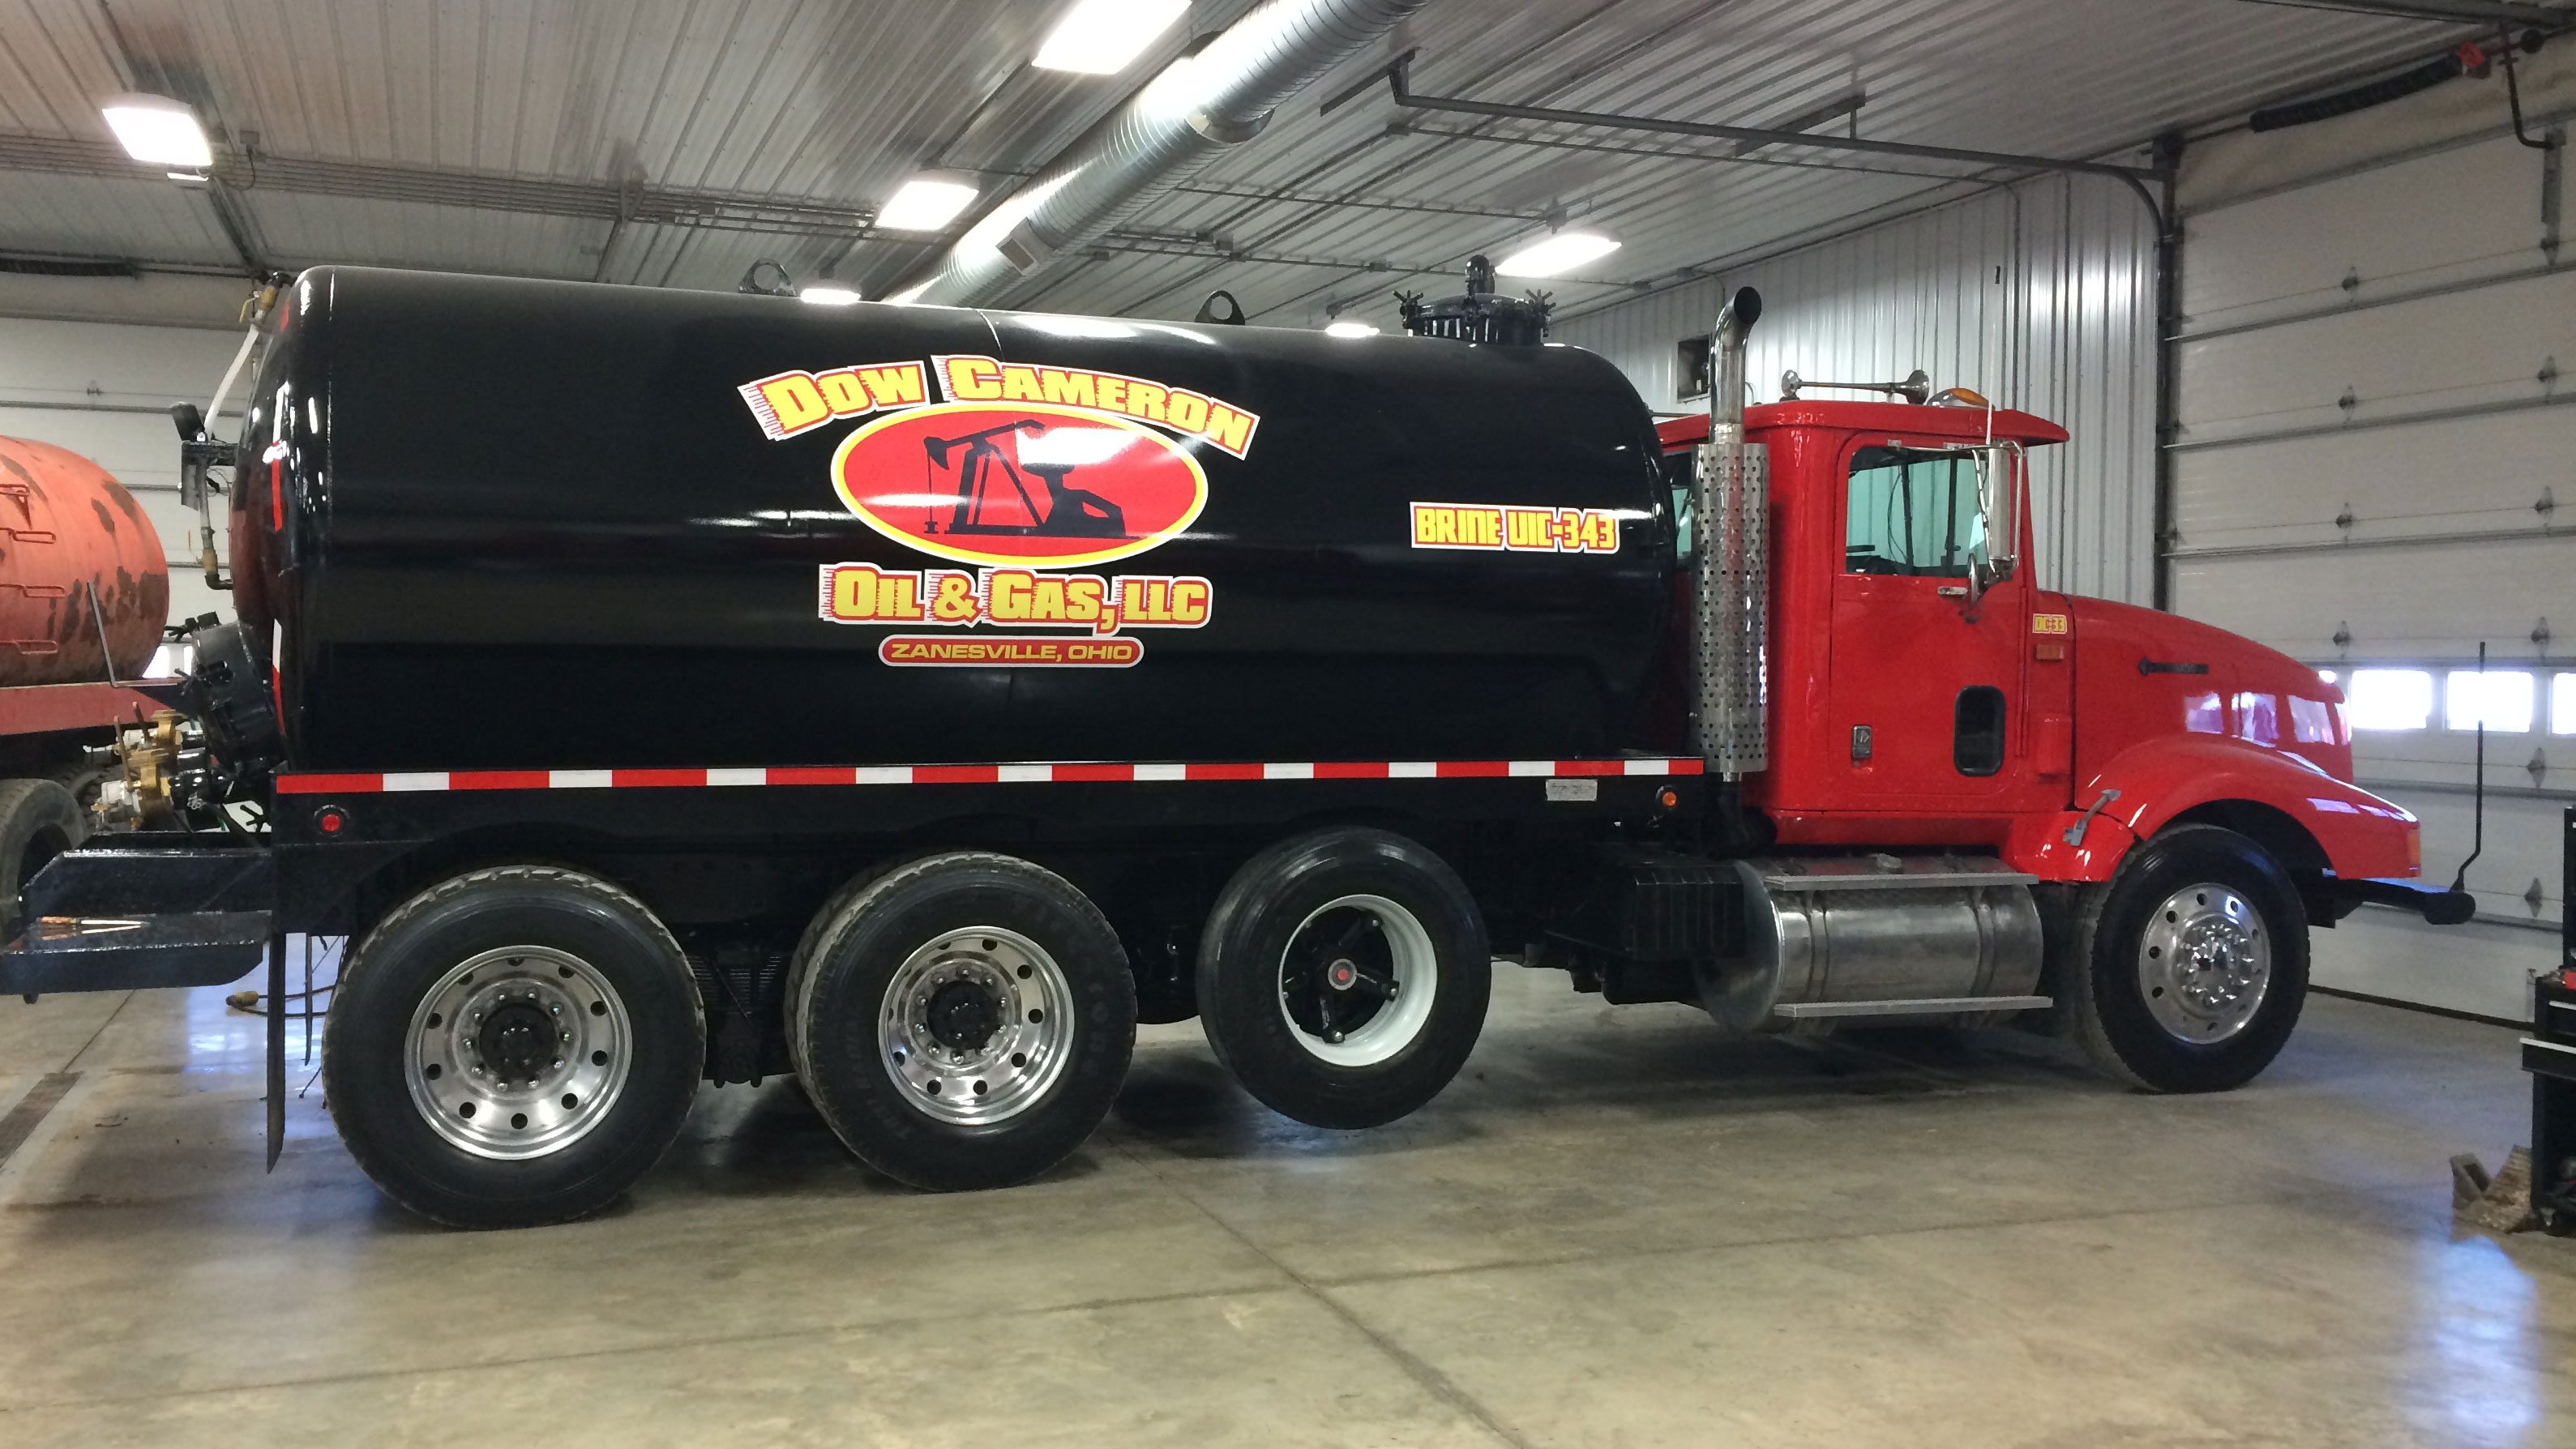 Dow Cameron Oil Gas Trucking Water Hauling Rigging Fracking Services Ohio Storage Water Hauling